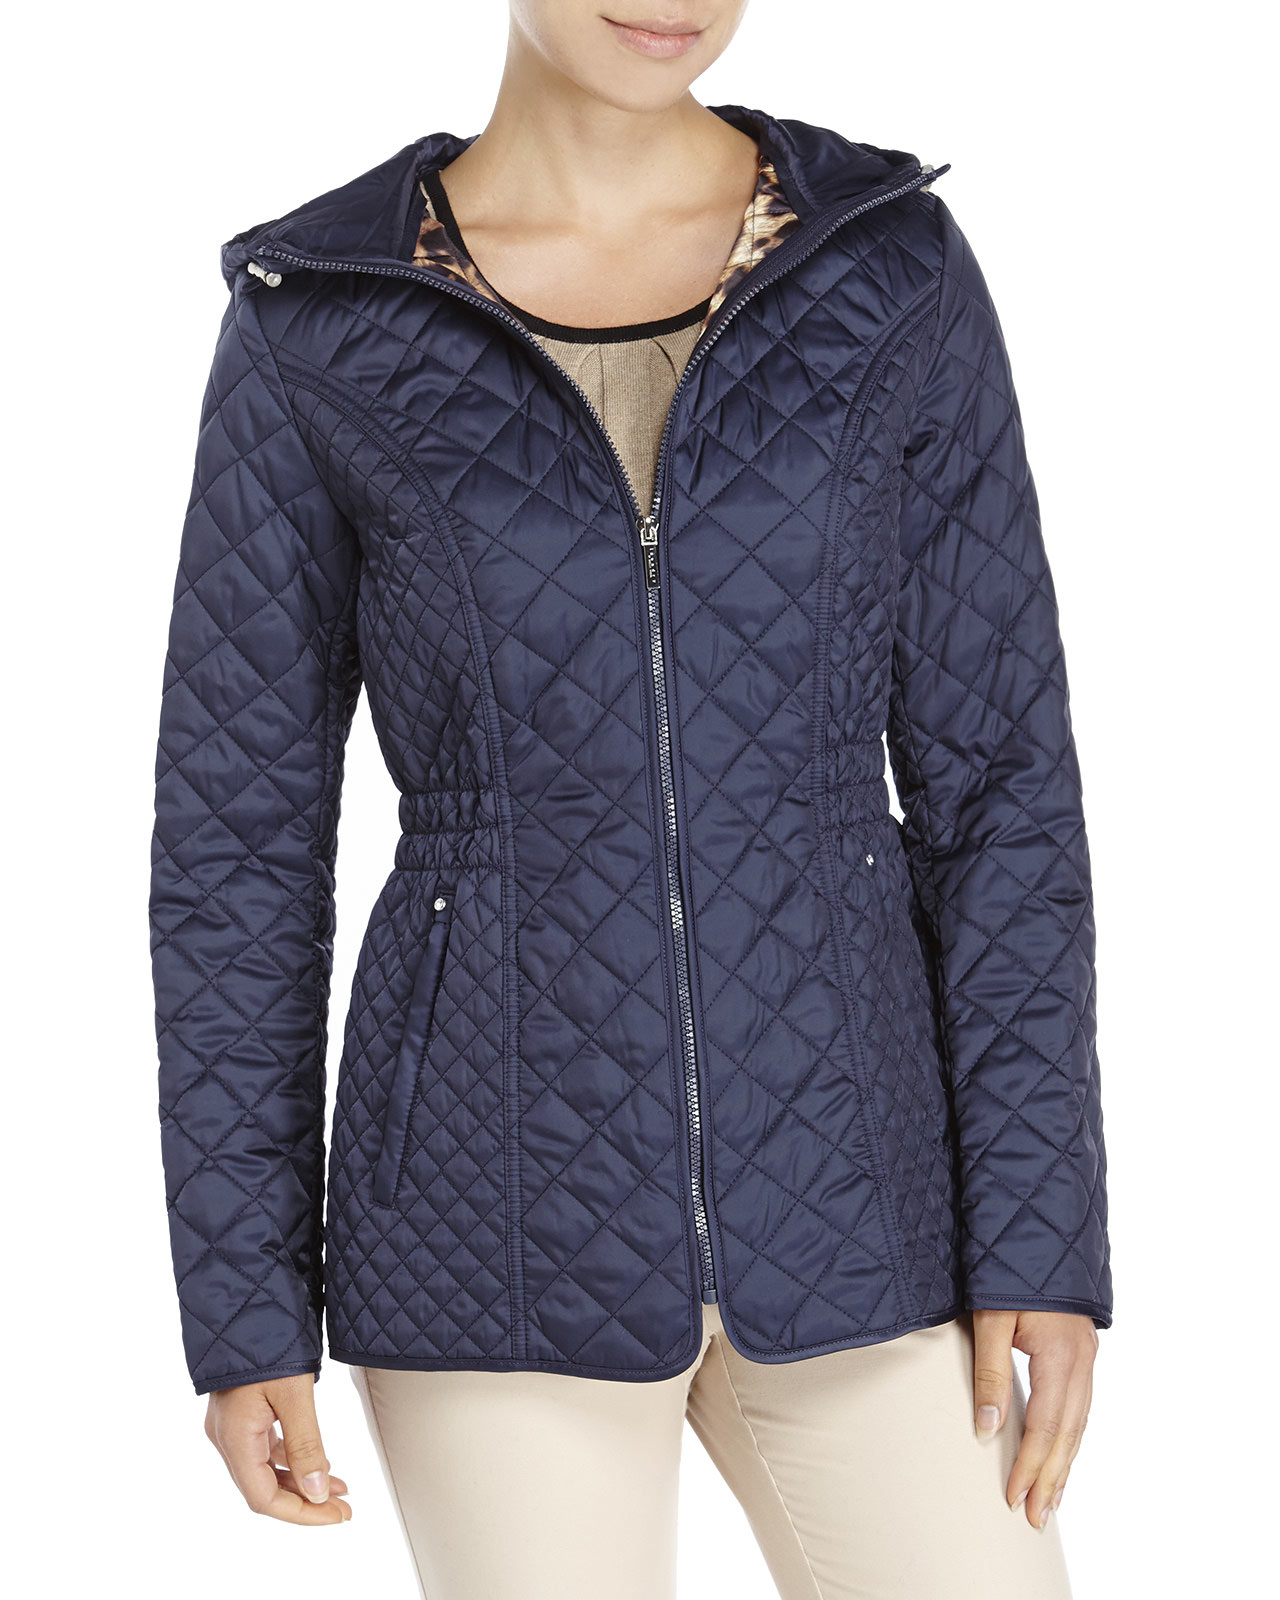 Laundry by shelli segal Diamond Quilted Hooded Jacket in Blue (Mystic ...